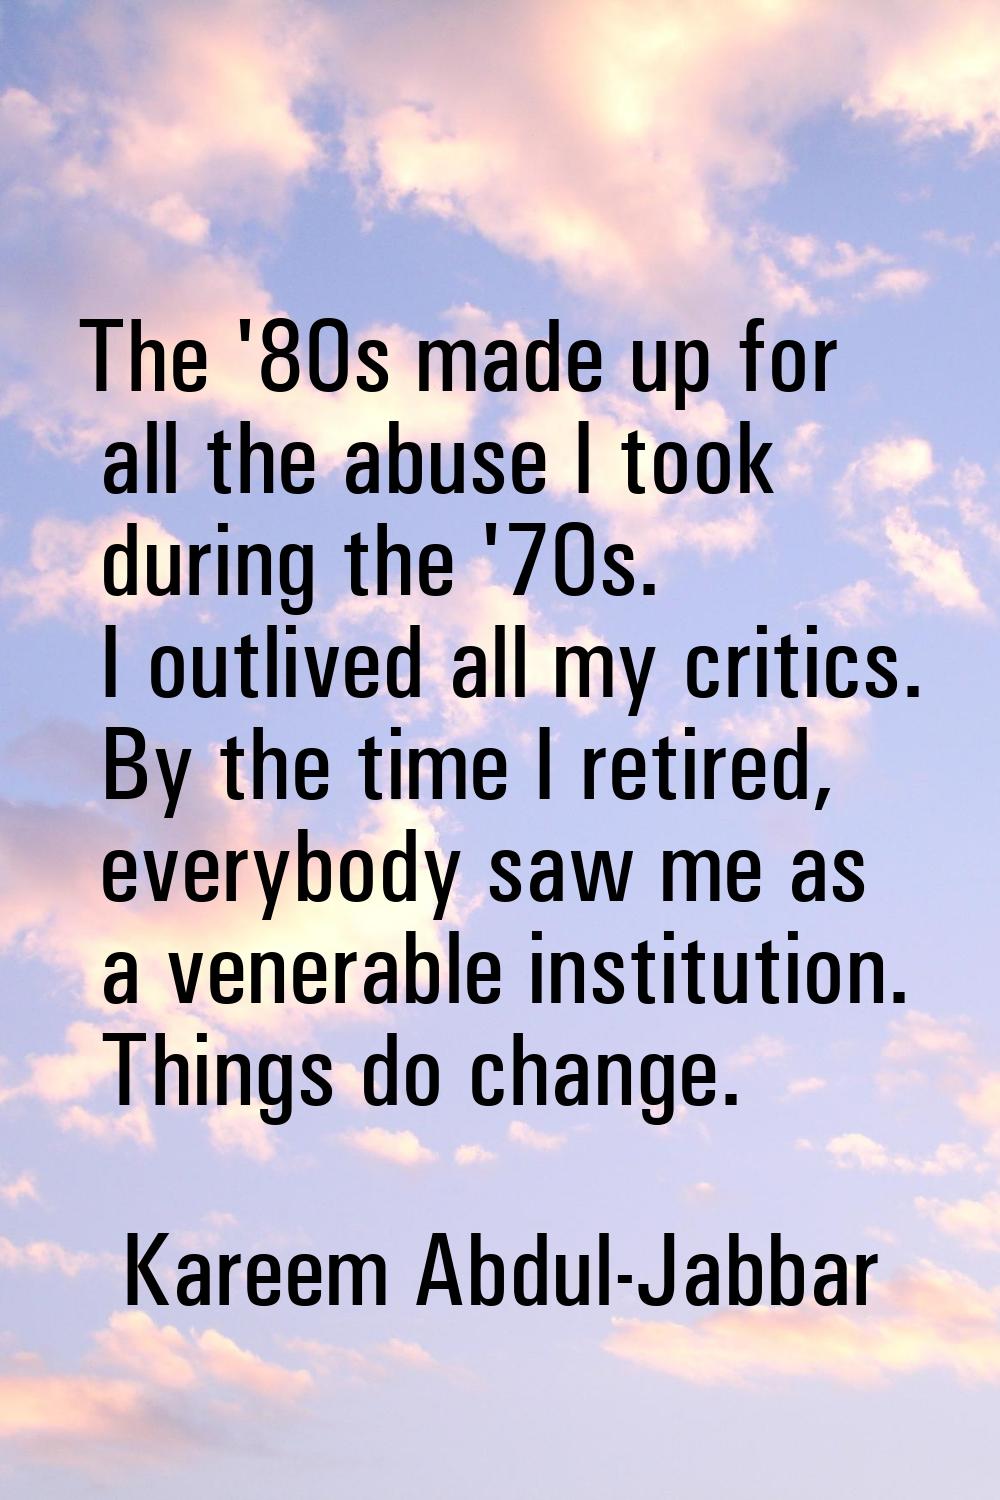 The '80s made up for all the abuse I took during the '70s. I outlived all my critics. By the time I